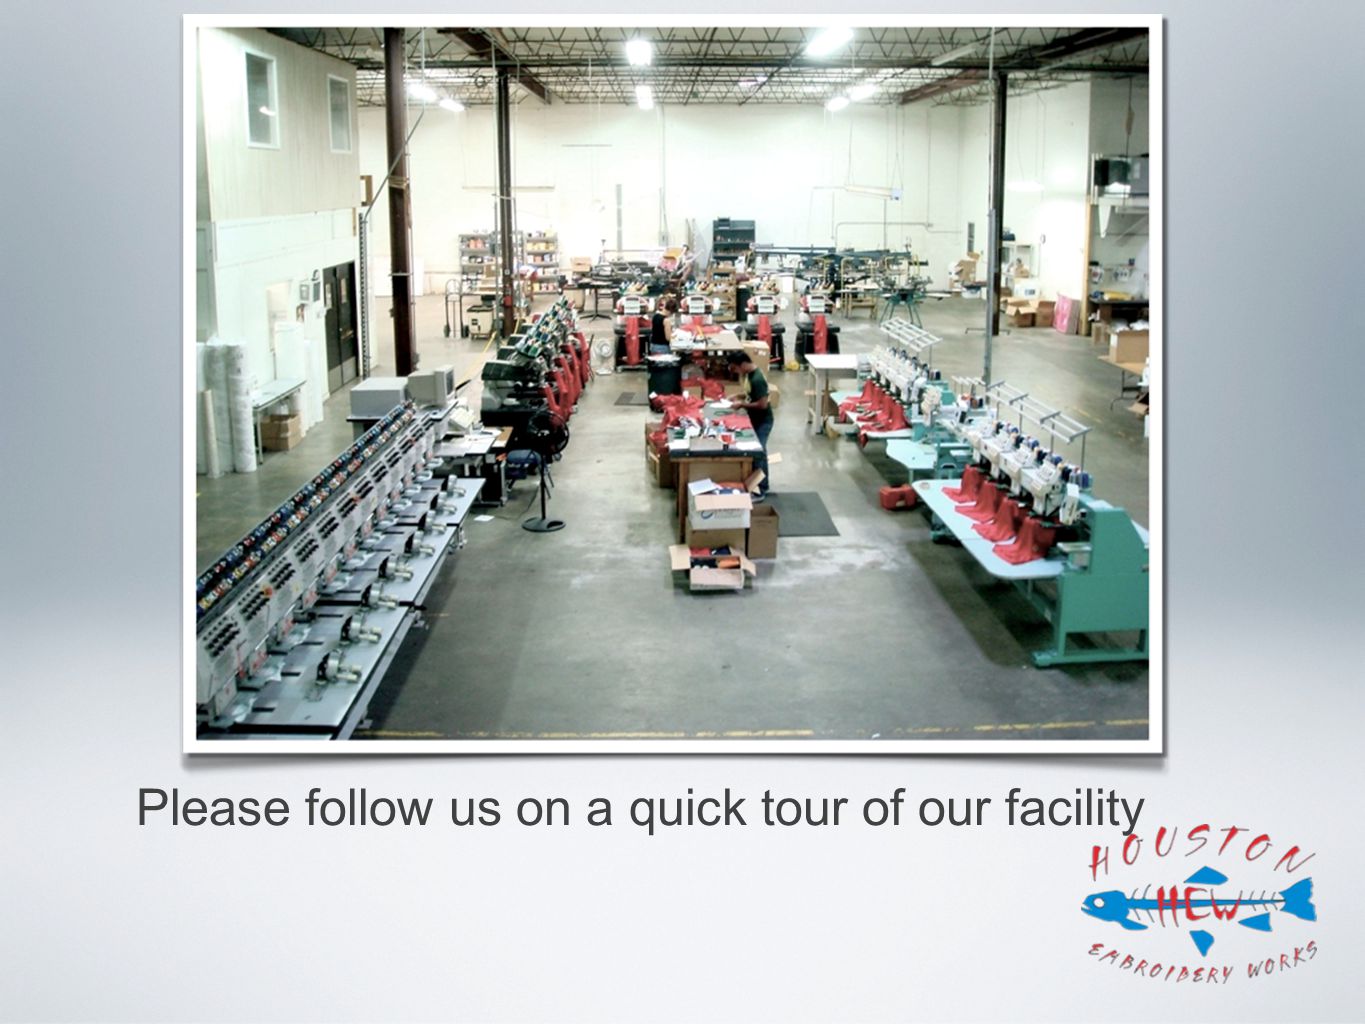 Please follow us on a quick tour of our facility